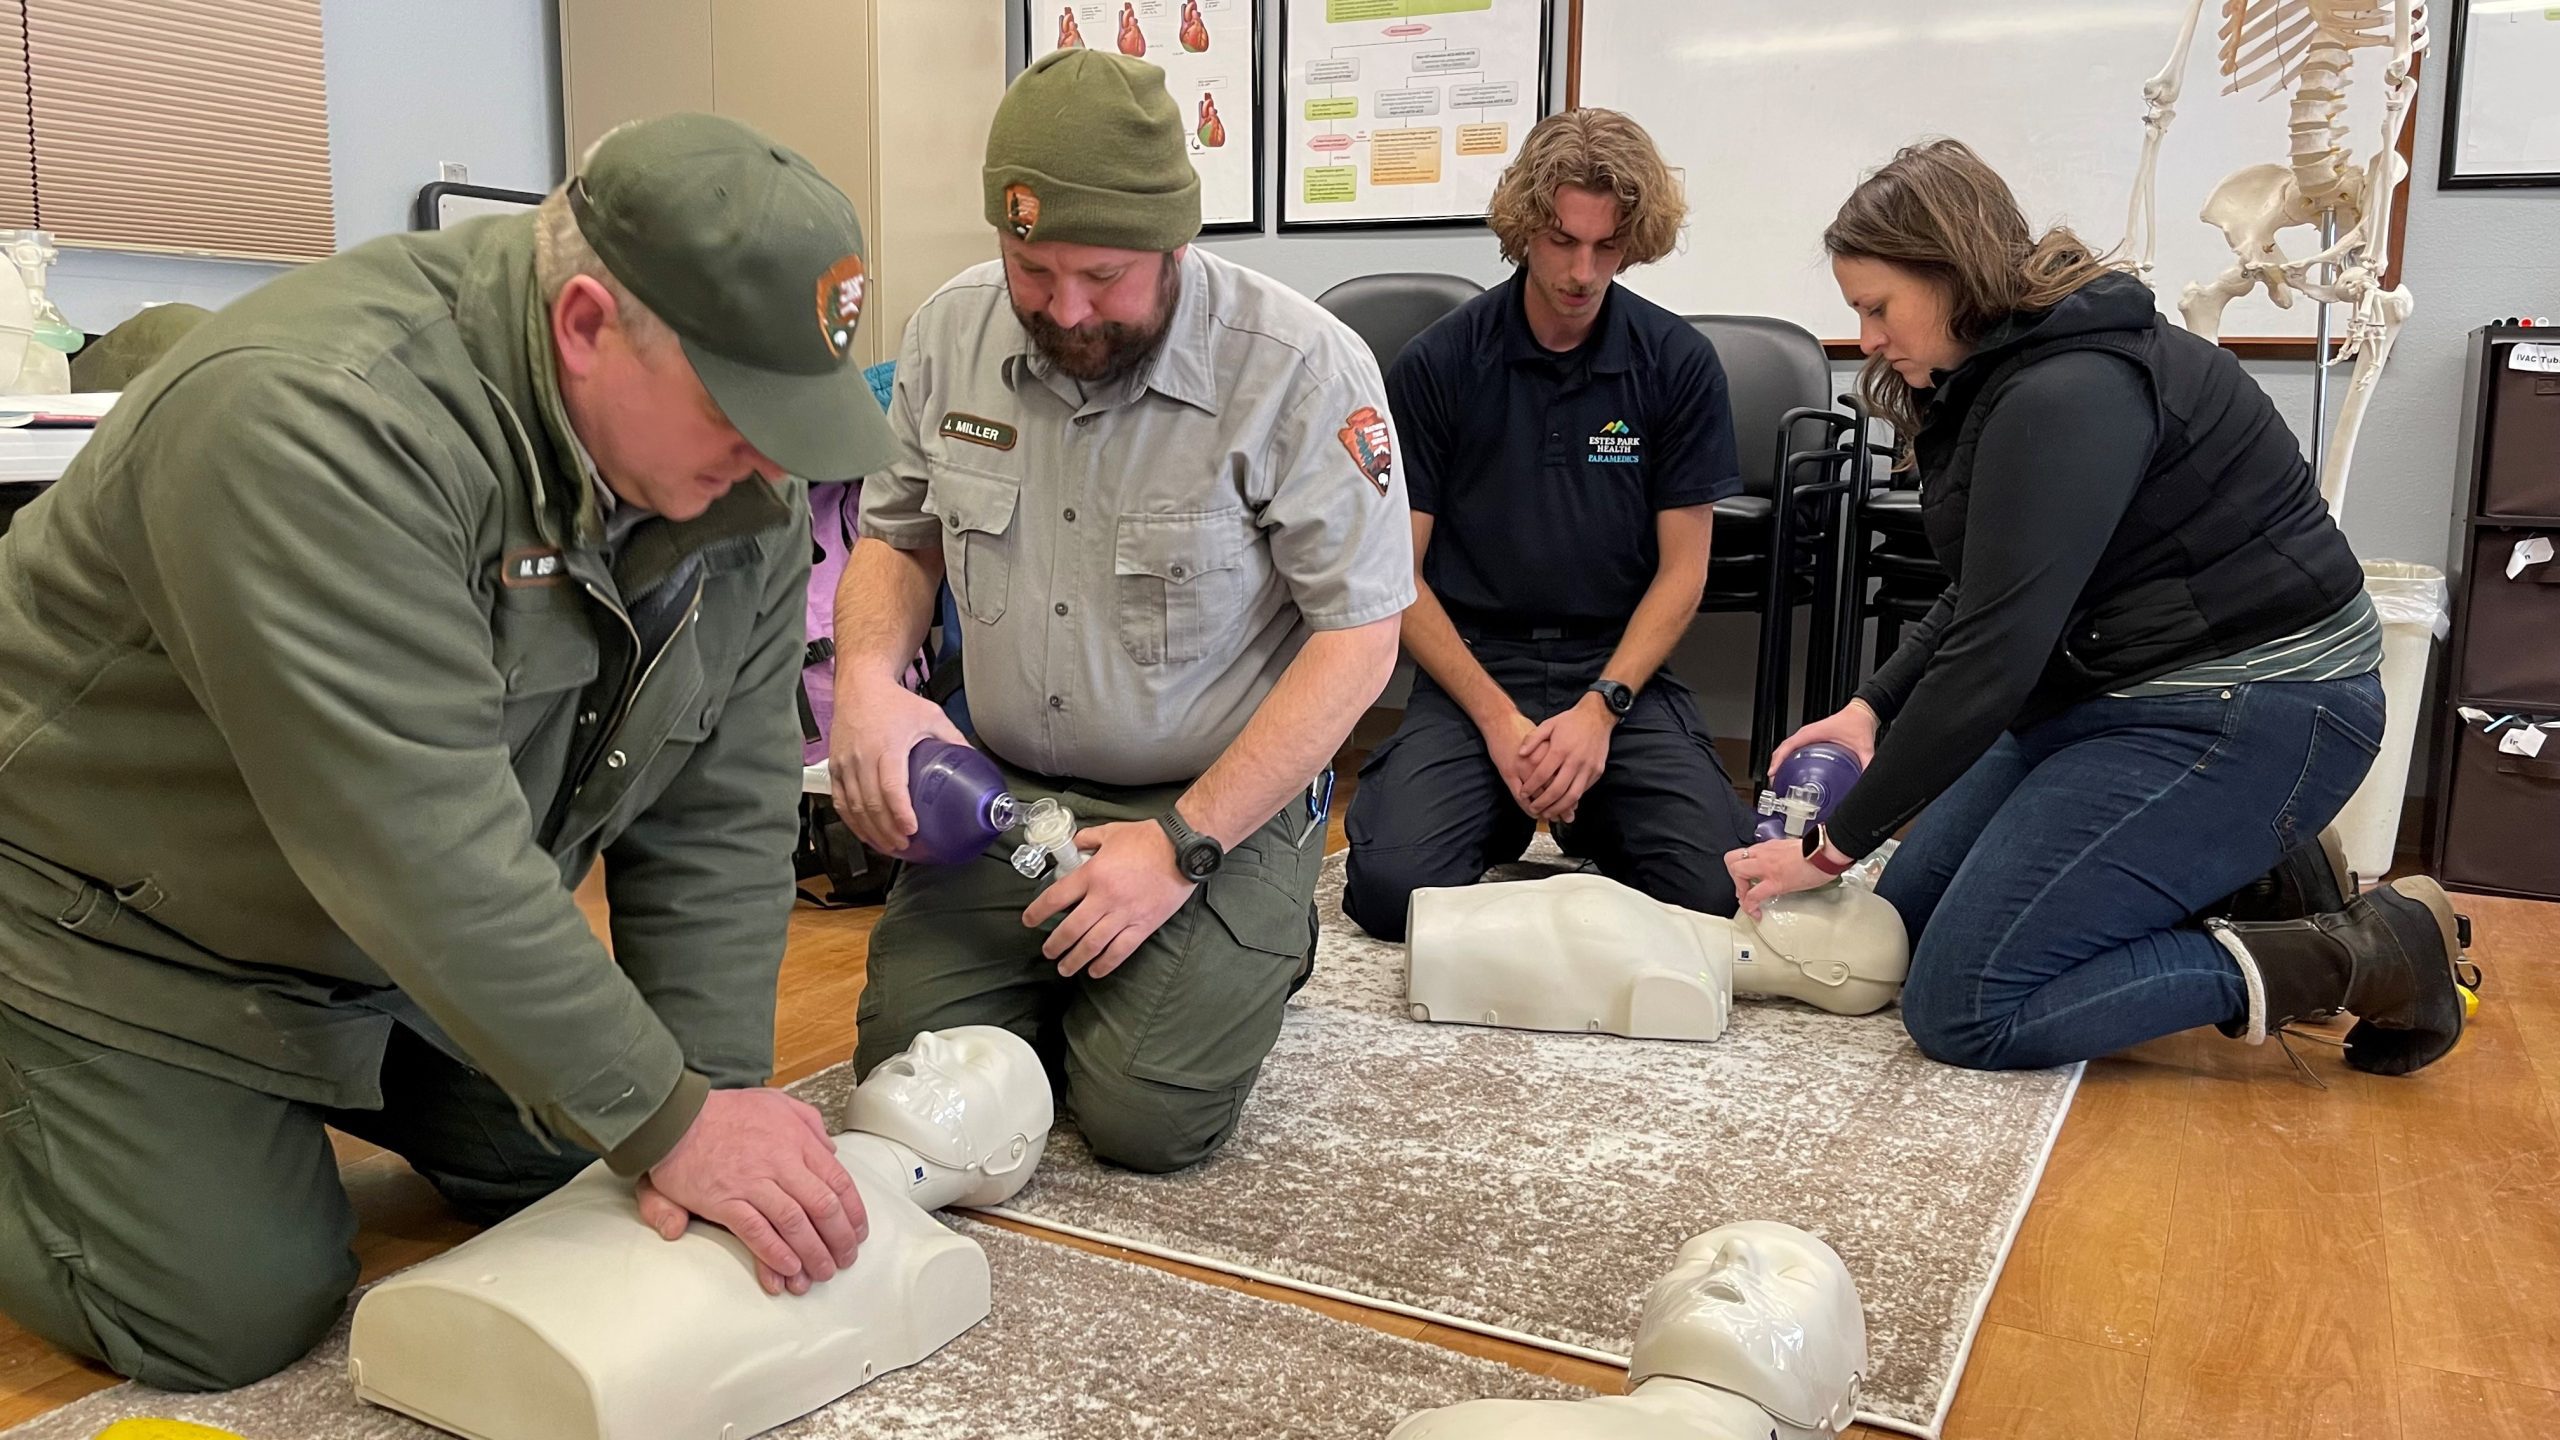 Four people practice CPR on mannequins in a training room. Two individuals use bag valve masks while the others prepare for chest compressions. They are dressed in uniforms and casual attire.